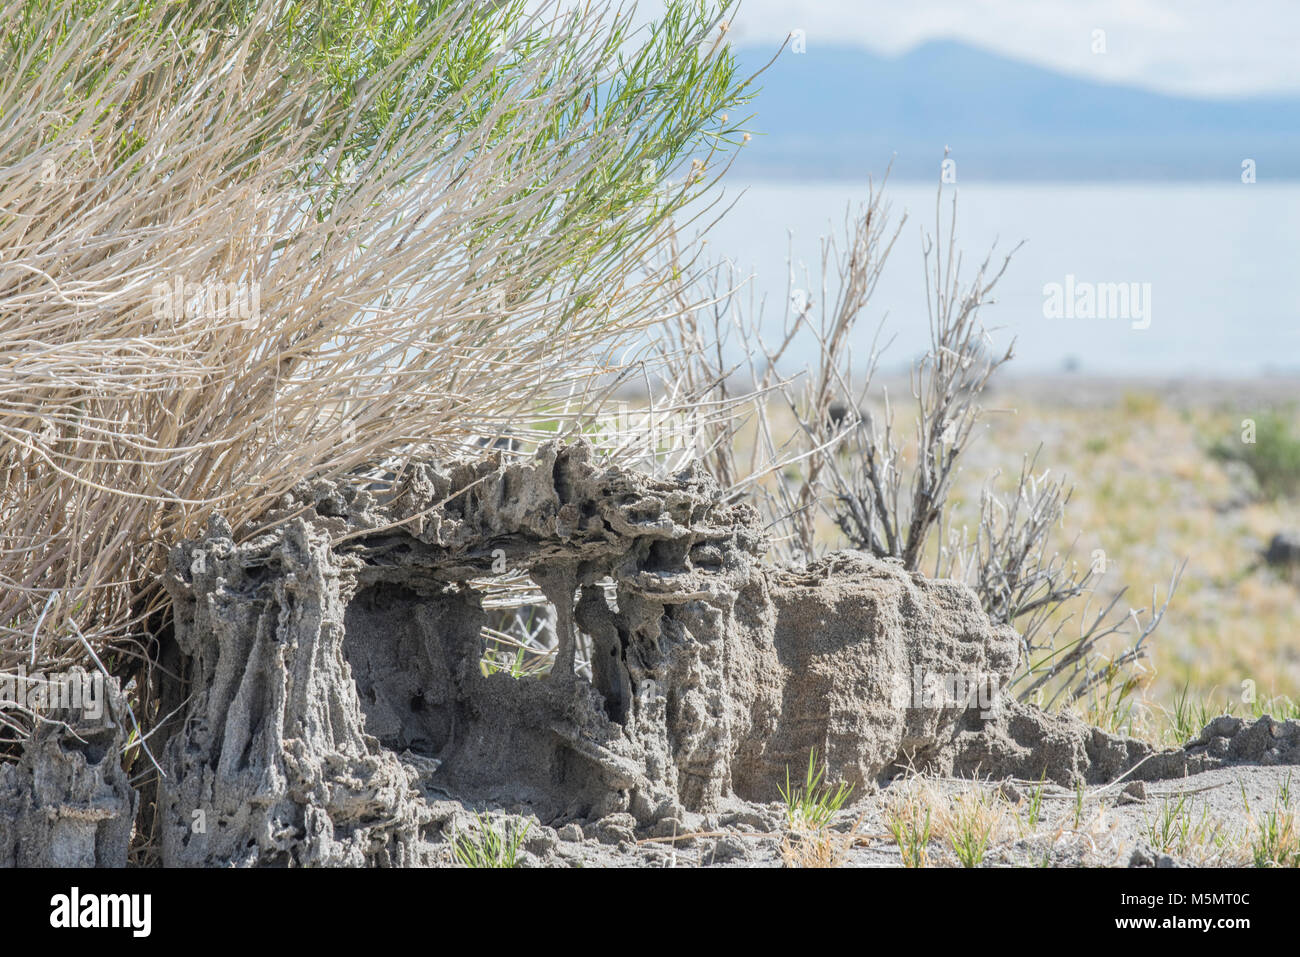 Sand tufas stand tall over Mono Lake, marking the salty water's recession over millenia in Lee Vining, California Stock Photo